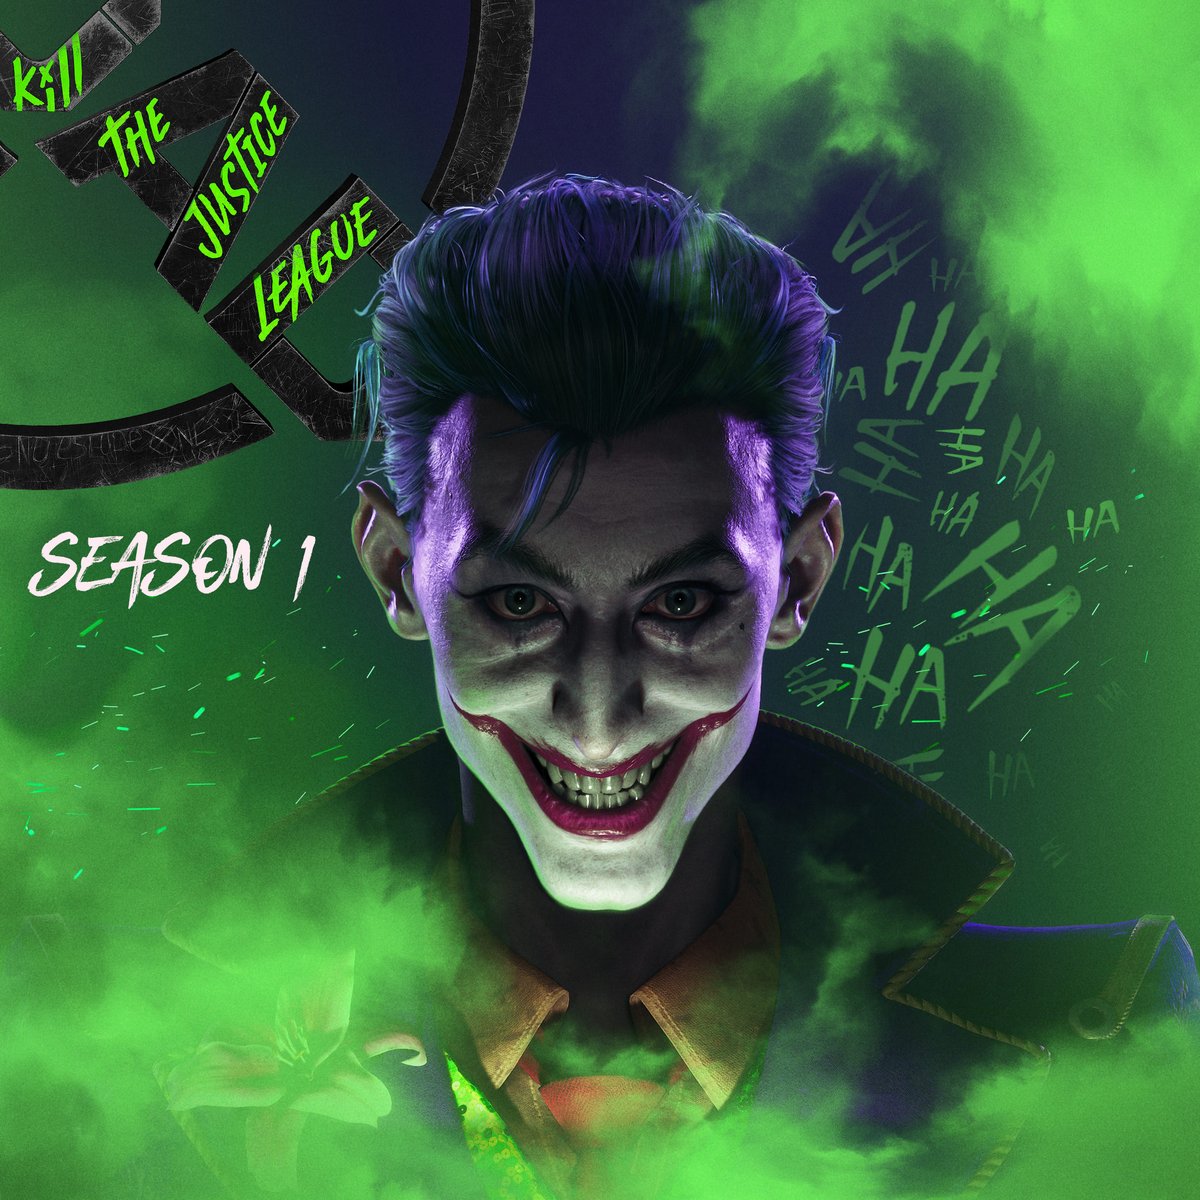 Suicide Squad: Kill the Justice League Season 1 is here and The Joker has joined the Squad as the newest playable character! 🃏 Haven't picked up the game yet? Don't miss out! Get it now in the GAME sale 👉 game-digital.visitlink.me/Cxva-m